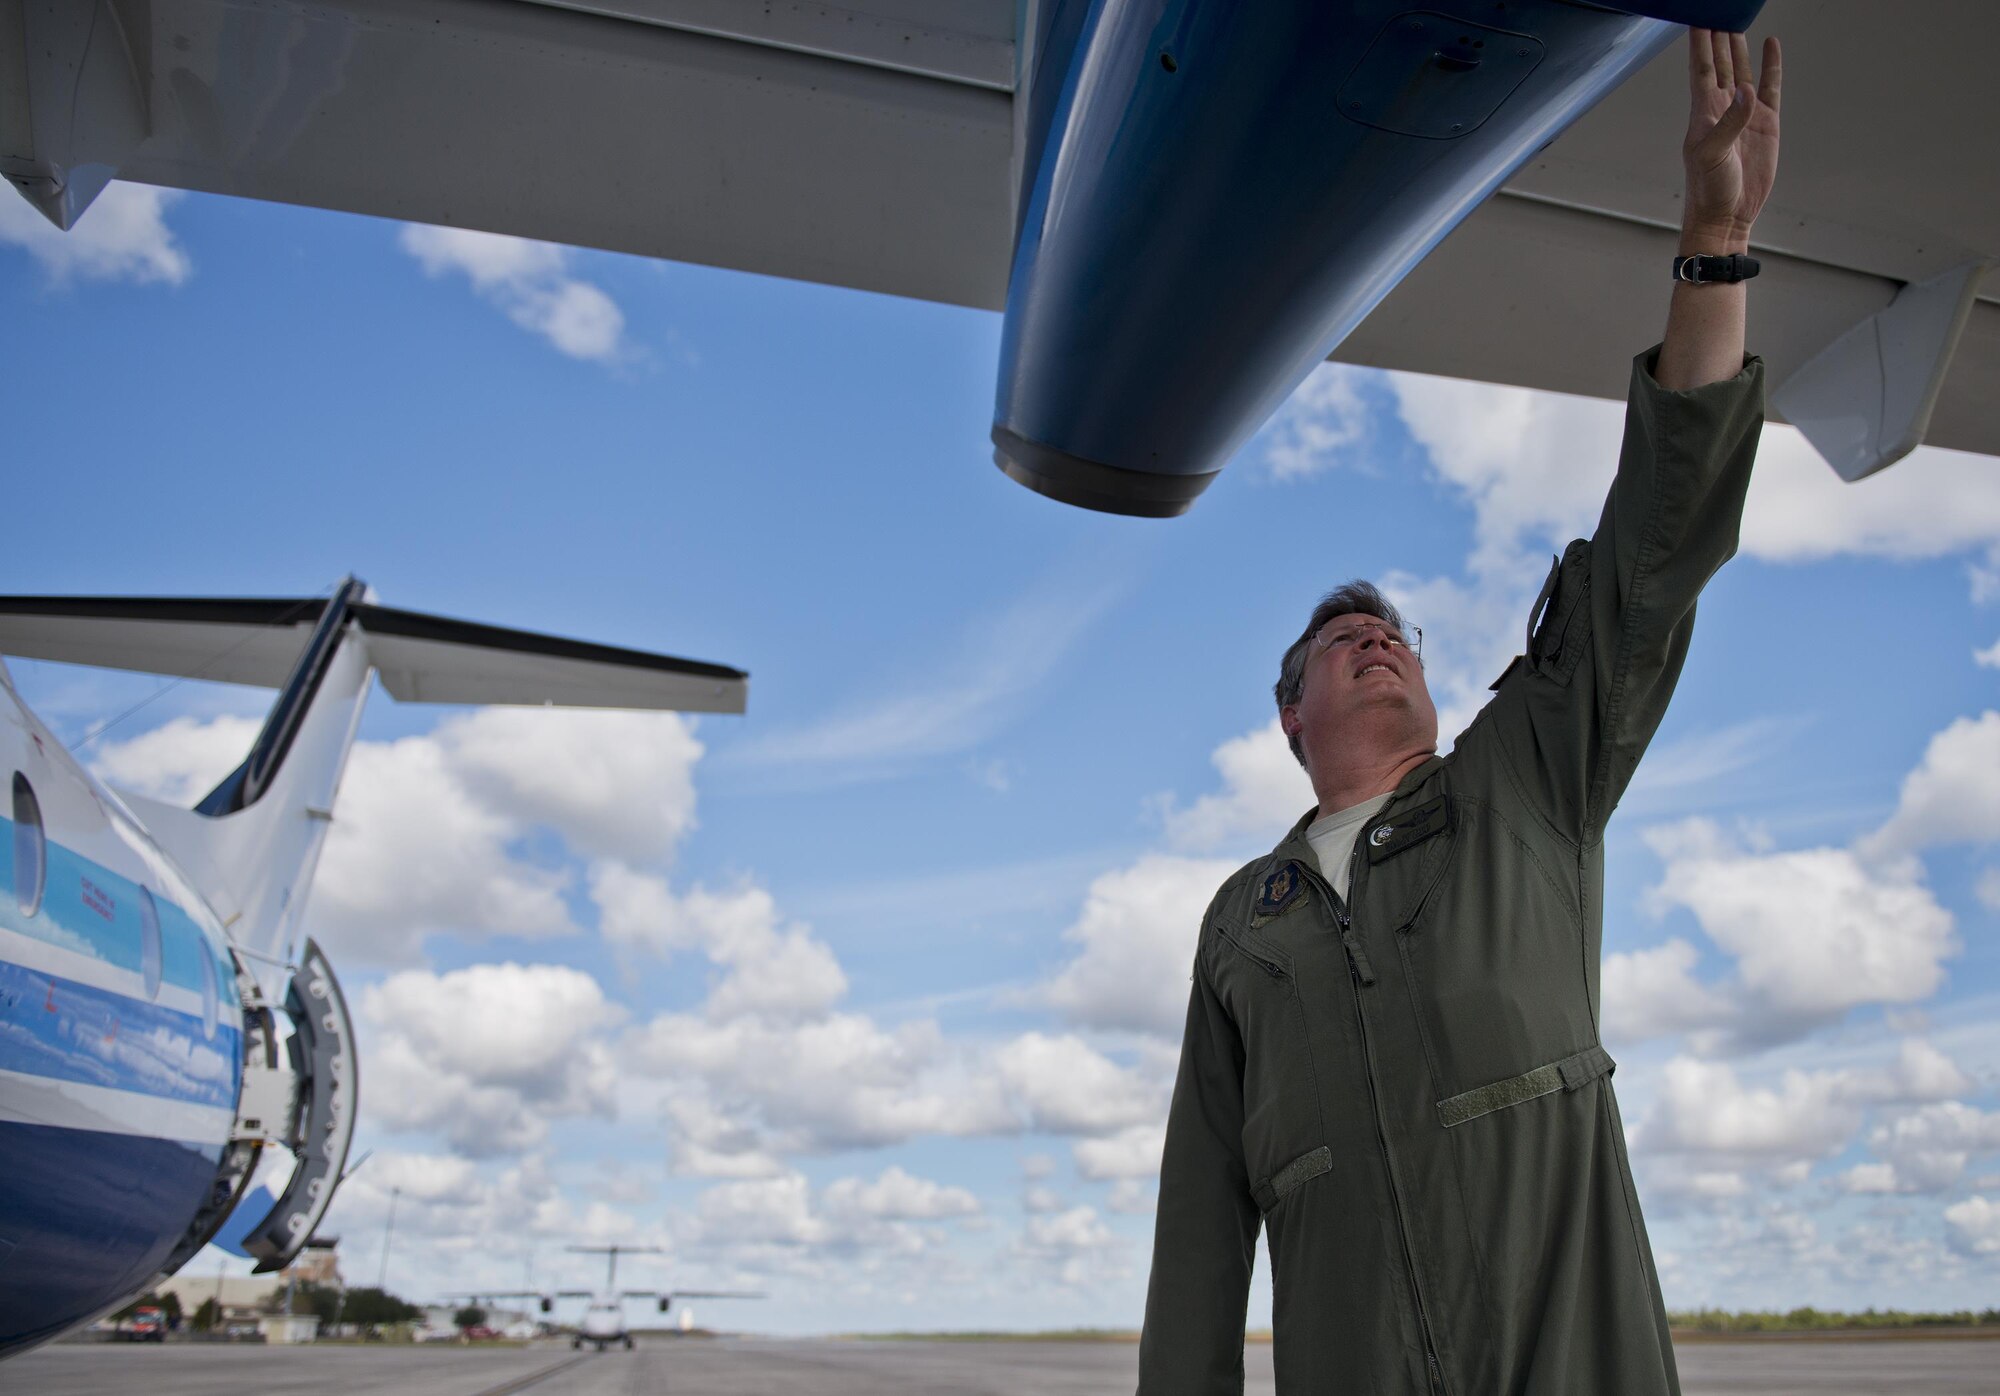 Senior Master Sgt. Bill Bethke, 711th Special Operations Squadron, completes his postflight checks on a C-146 Wolfhound at Duke Field, Fla., Oct. 21.  The Air Force Special Operations Wing aircraft are used specifically in the training and operation of the 919th Special Operations Wing’s nonstandard aviation mission.  (U.S. Air Force photo/Tech. Sgt. Sam King)